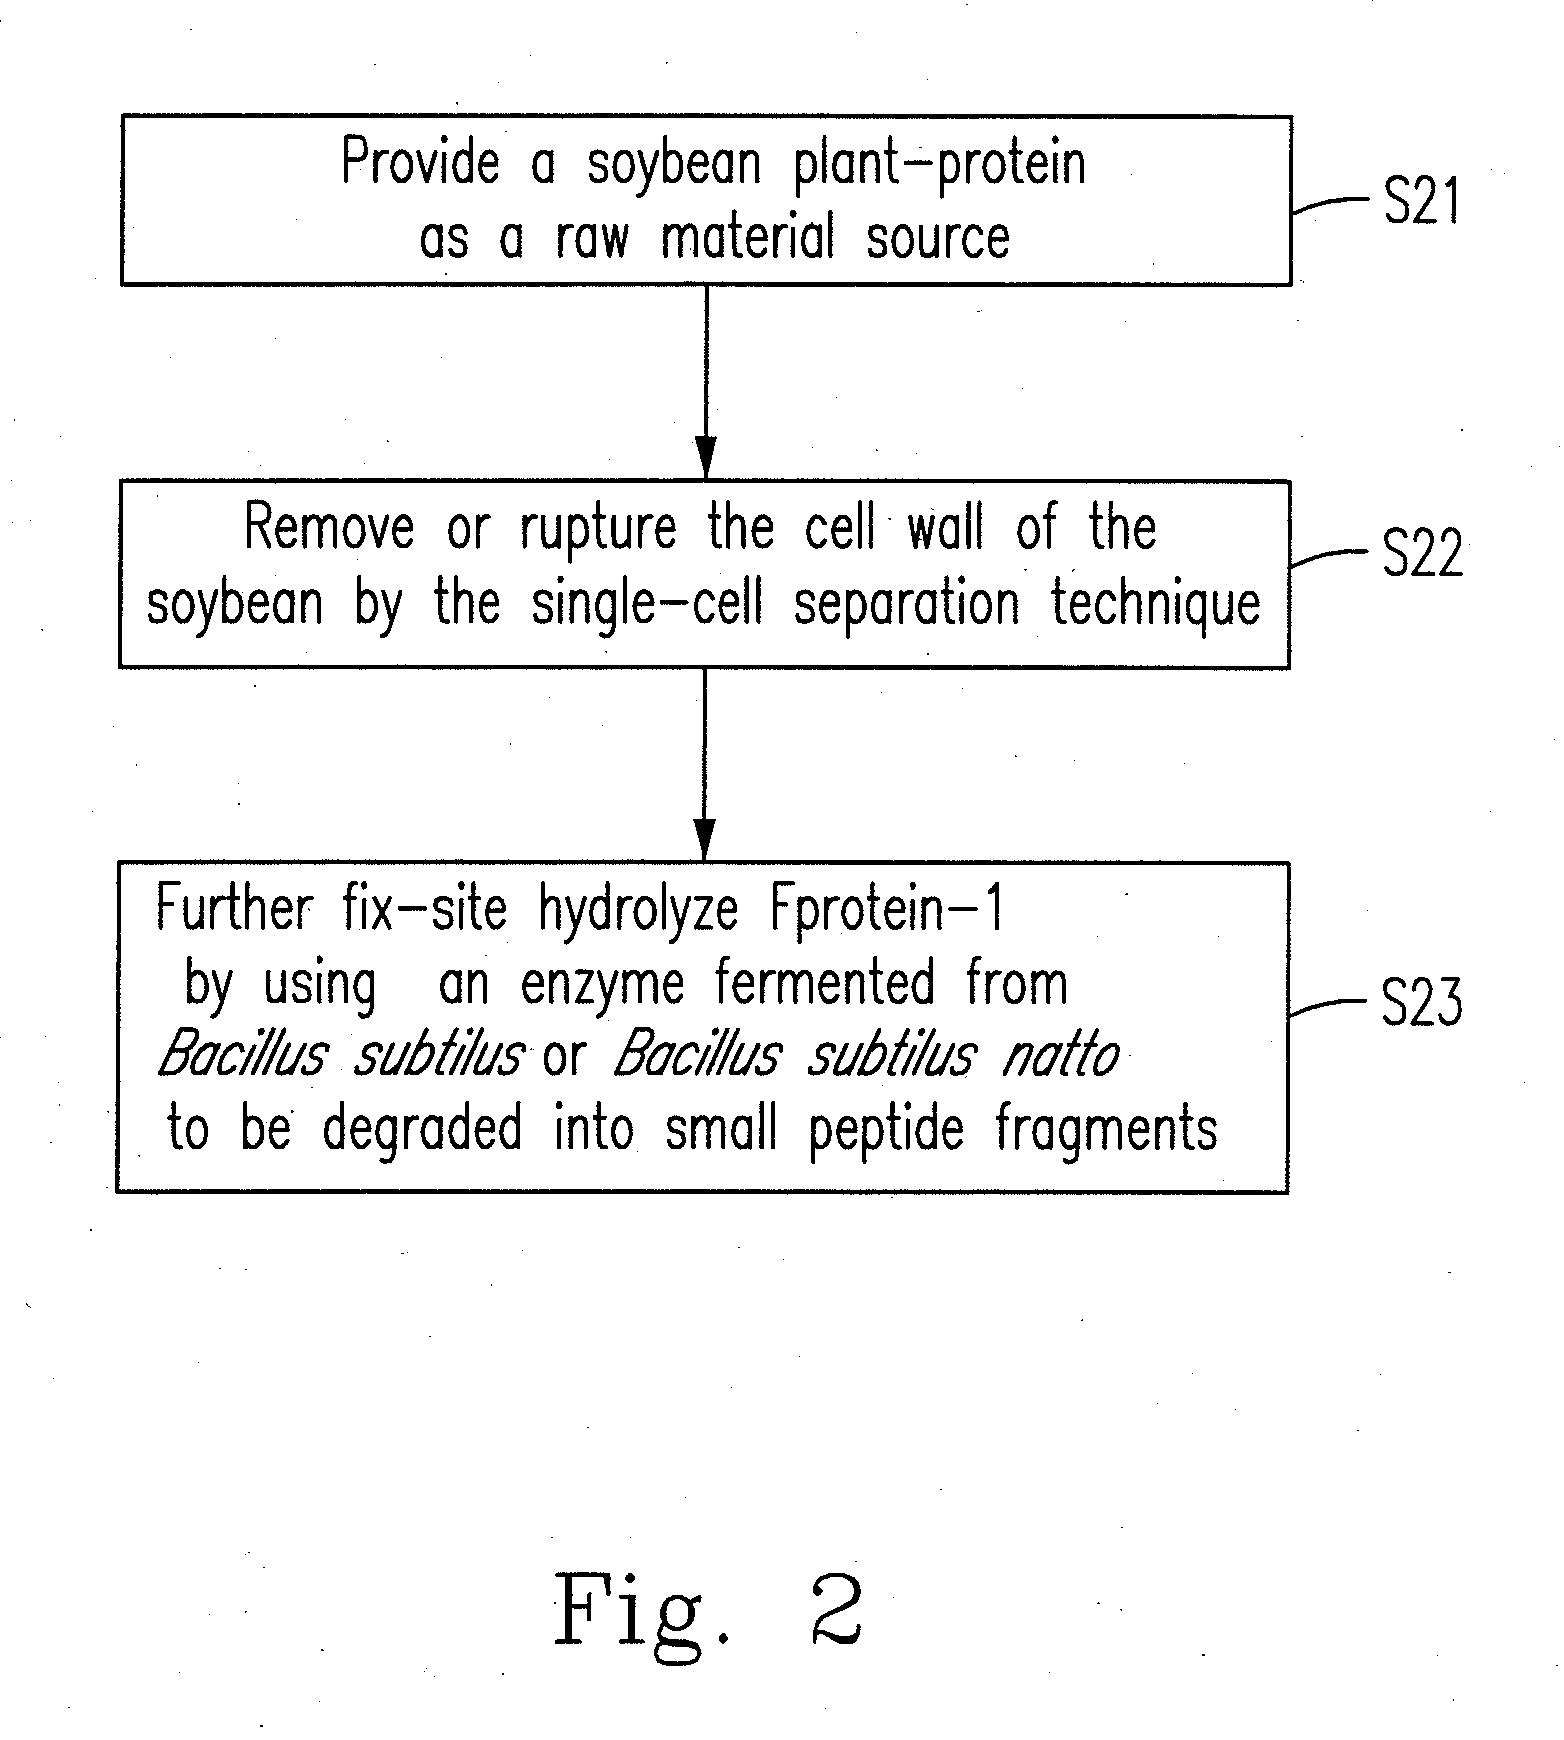 Plant-protein product and method for preparing the same